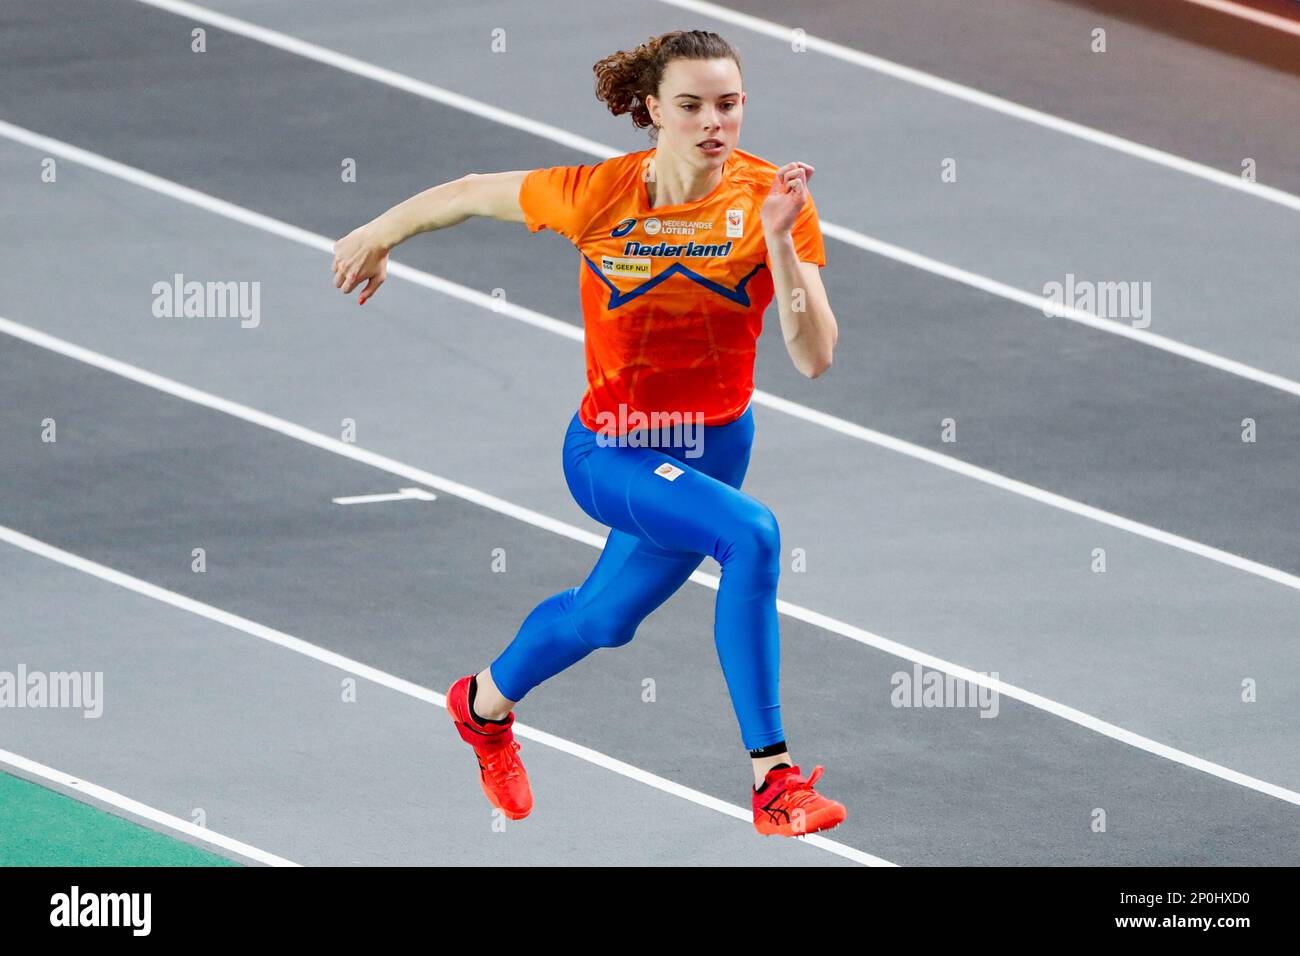 Istanbul, Turkey. 03rd Mar, 2023. ISTANBUL, TURKEY - MARCH 3: Sofie Dokter  of the Netherlands competing in the Men's 400m during Day 1 of the European  Athletics Indoor Championships at the Atakoy